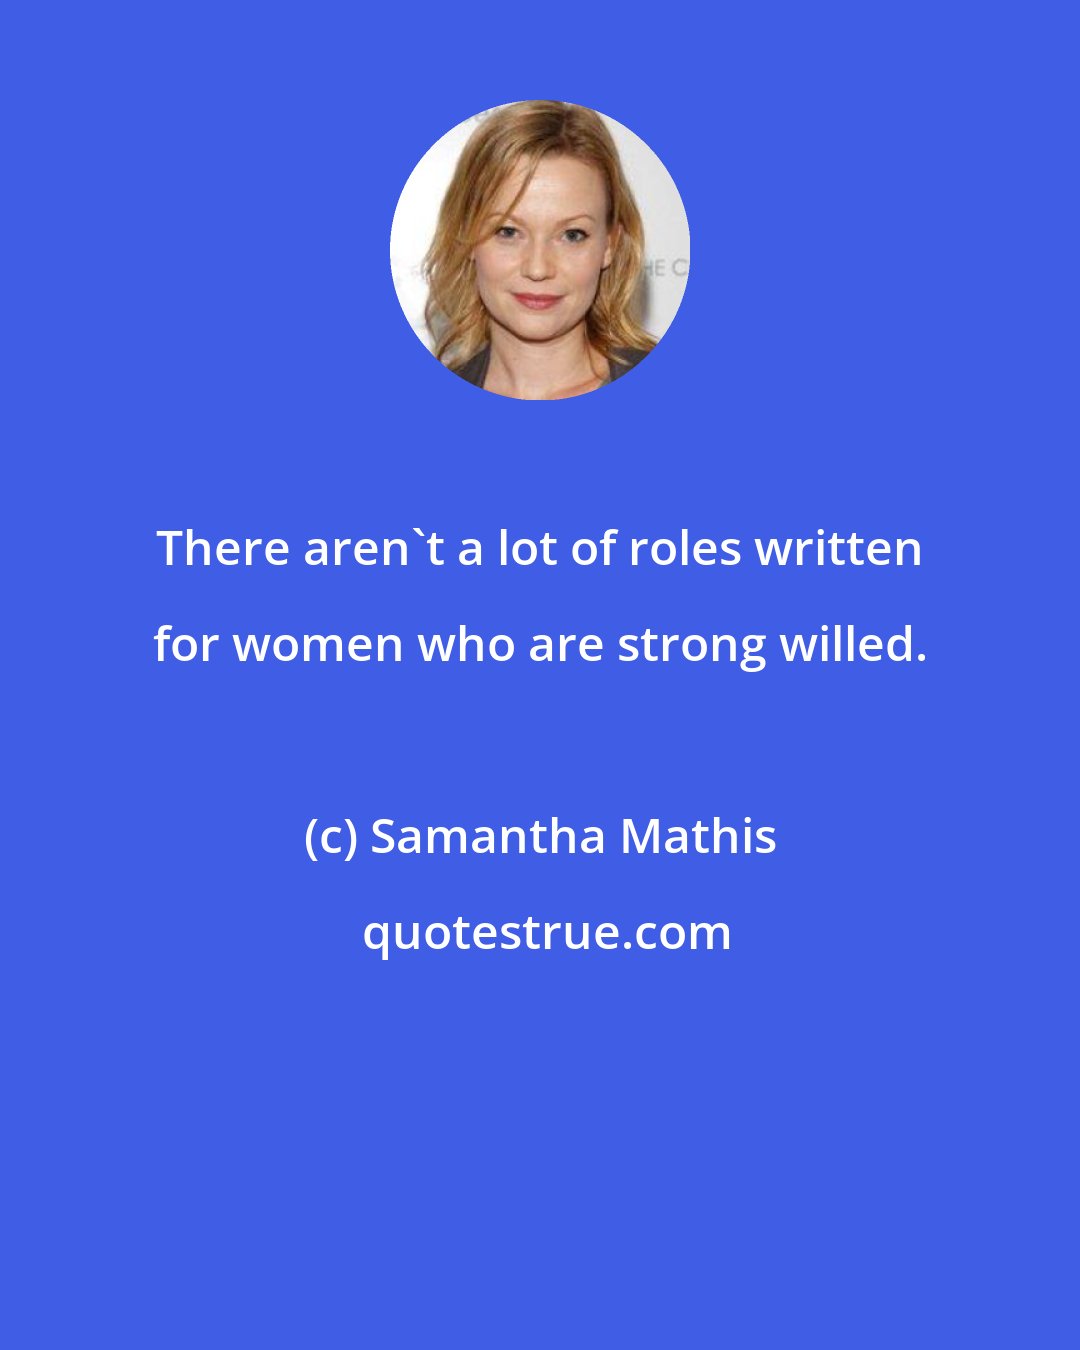 Samantha Mathis: There aren't a lot of roles written for women who are strong willed.